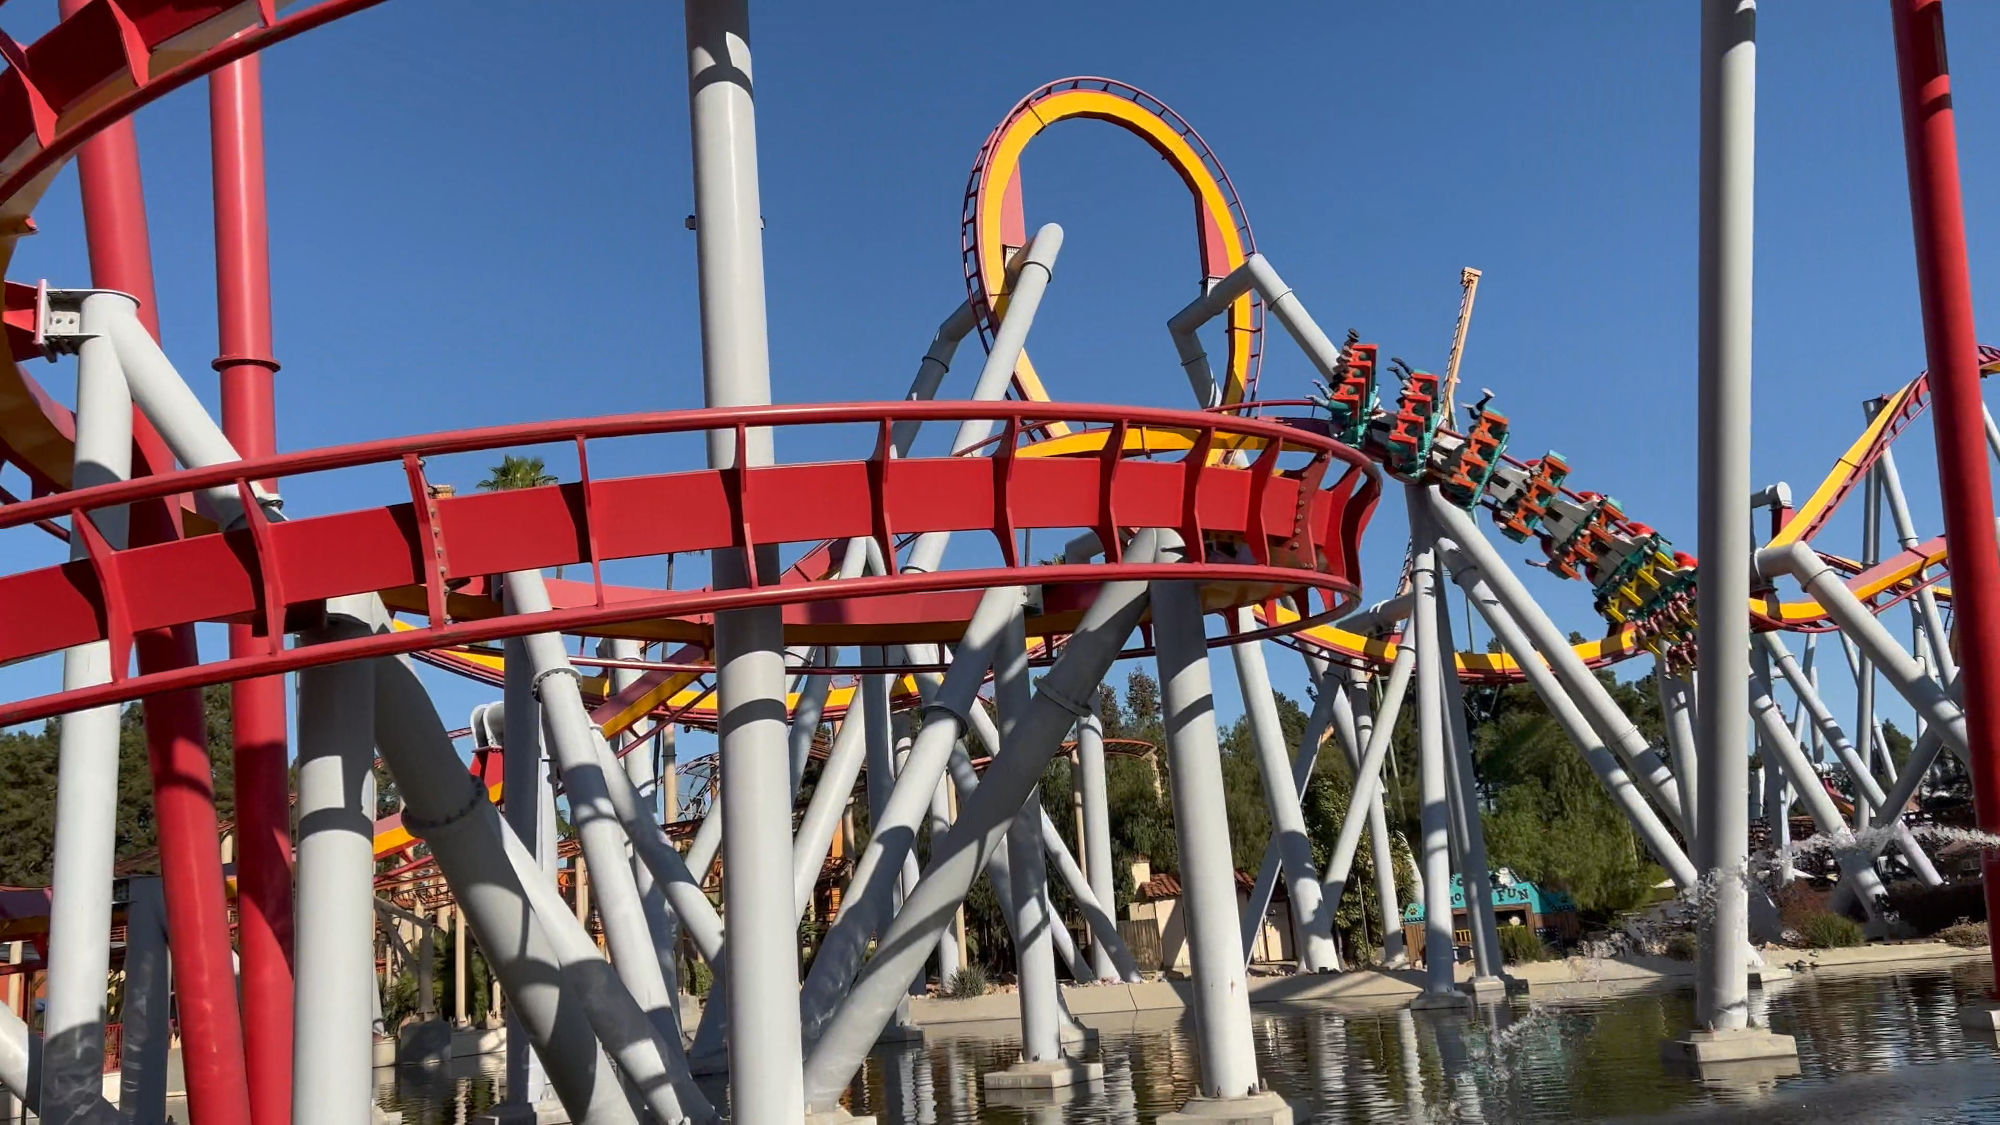 Silver Bullet at Knotts Berry Farm